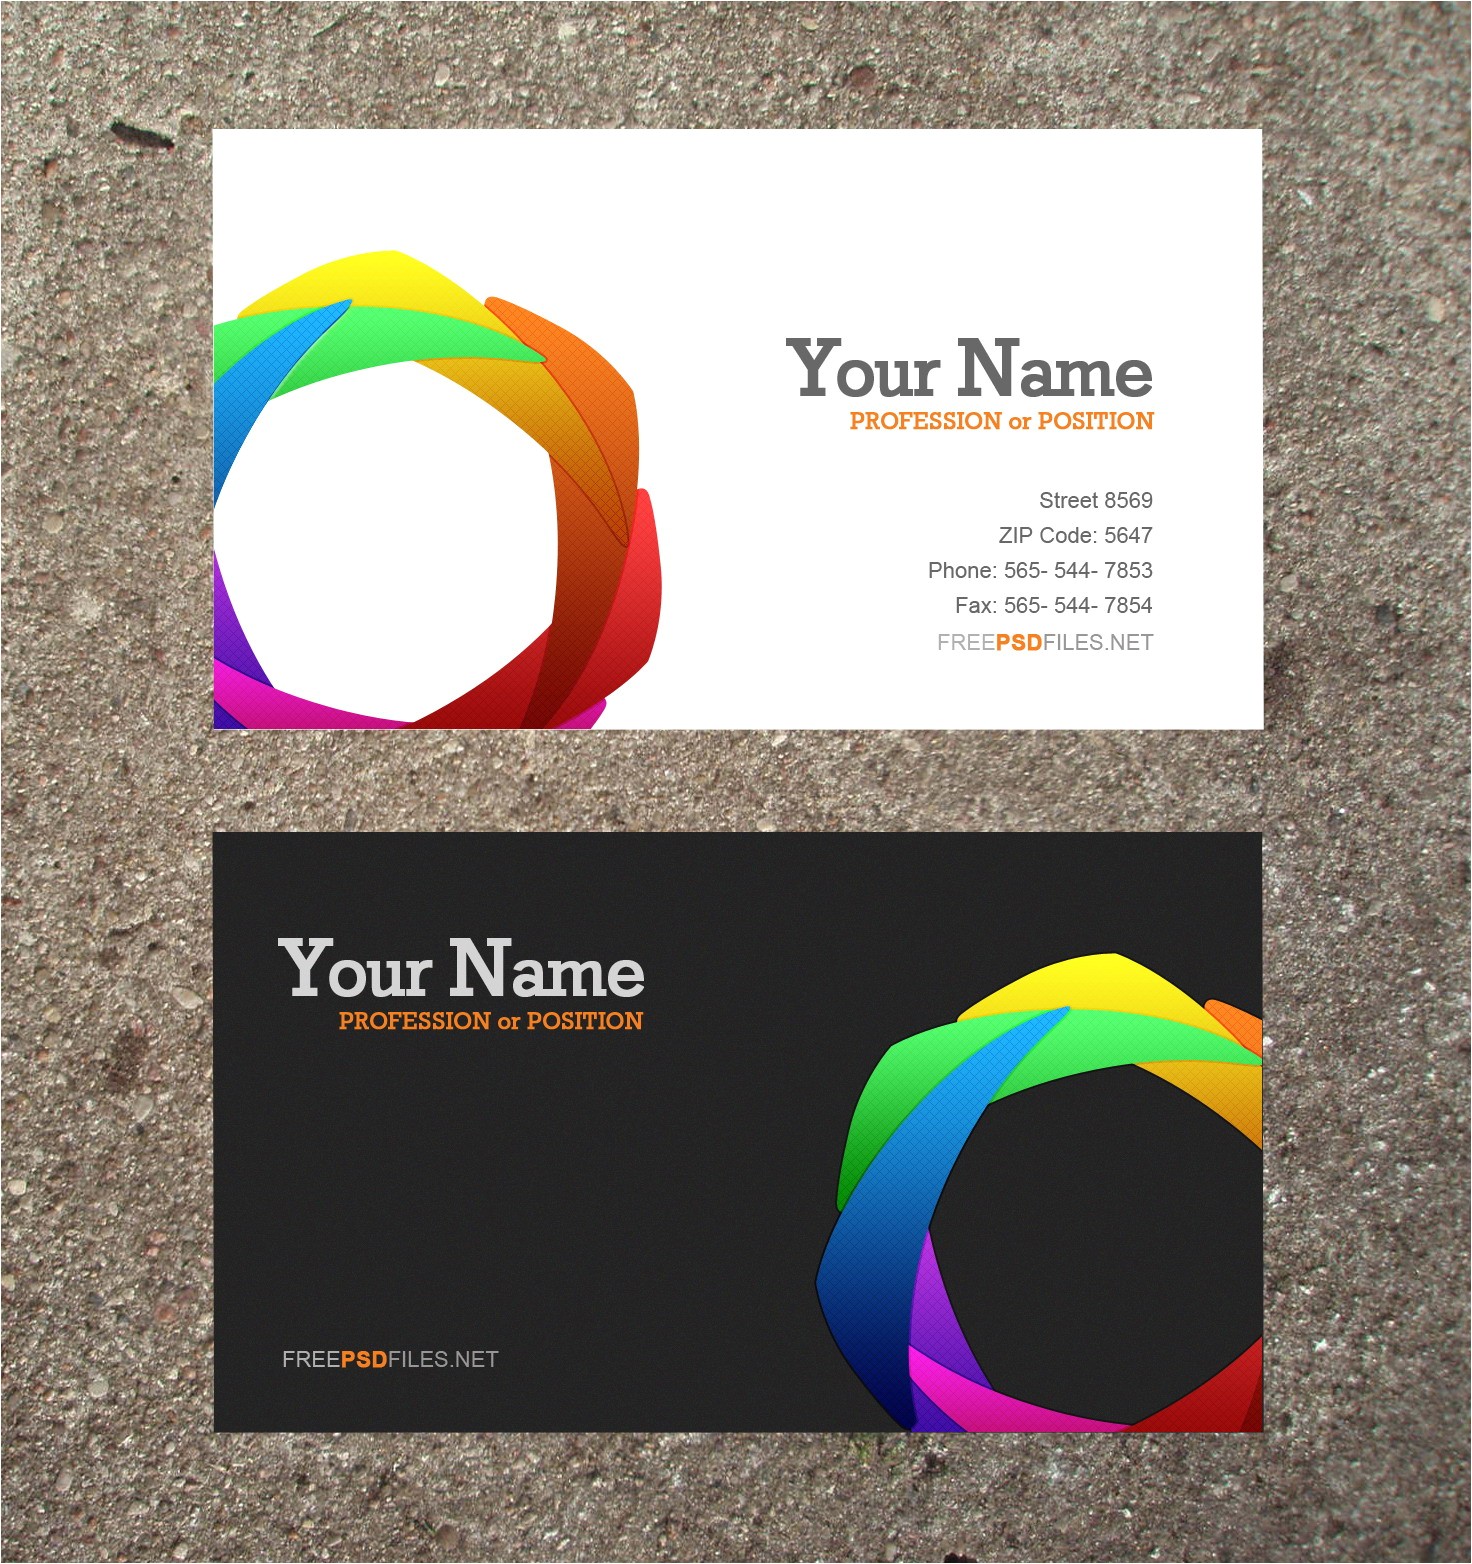 post free psd business card templates 152870